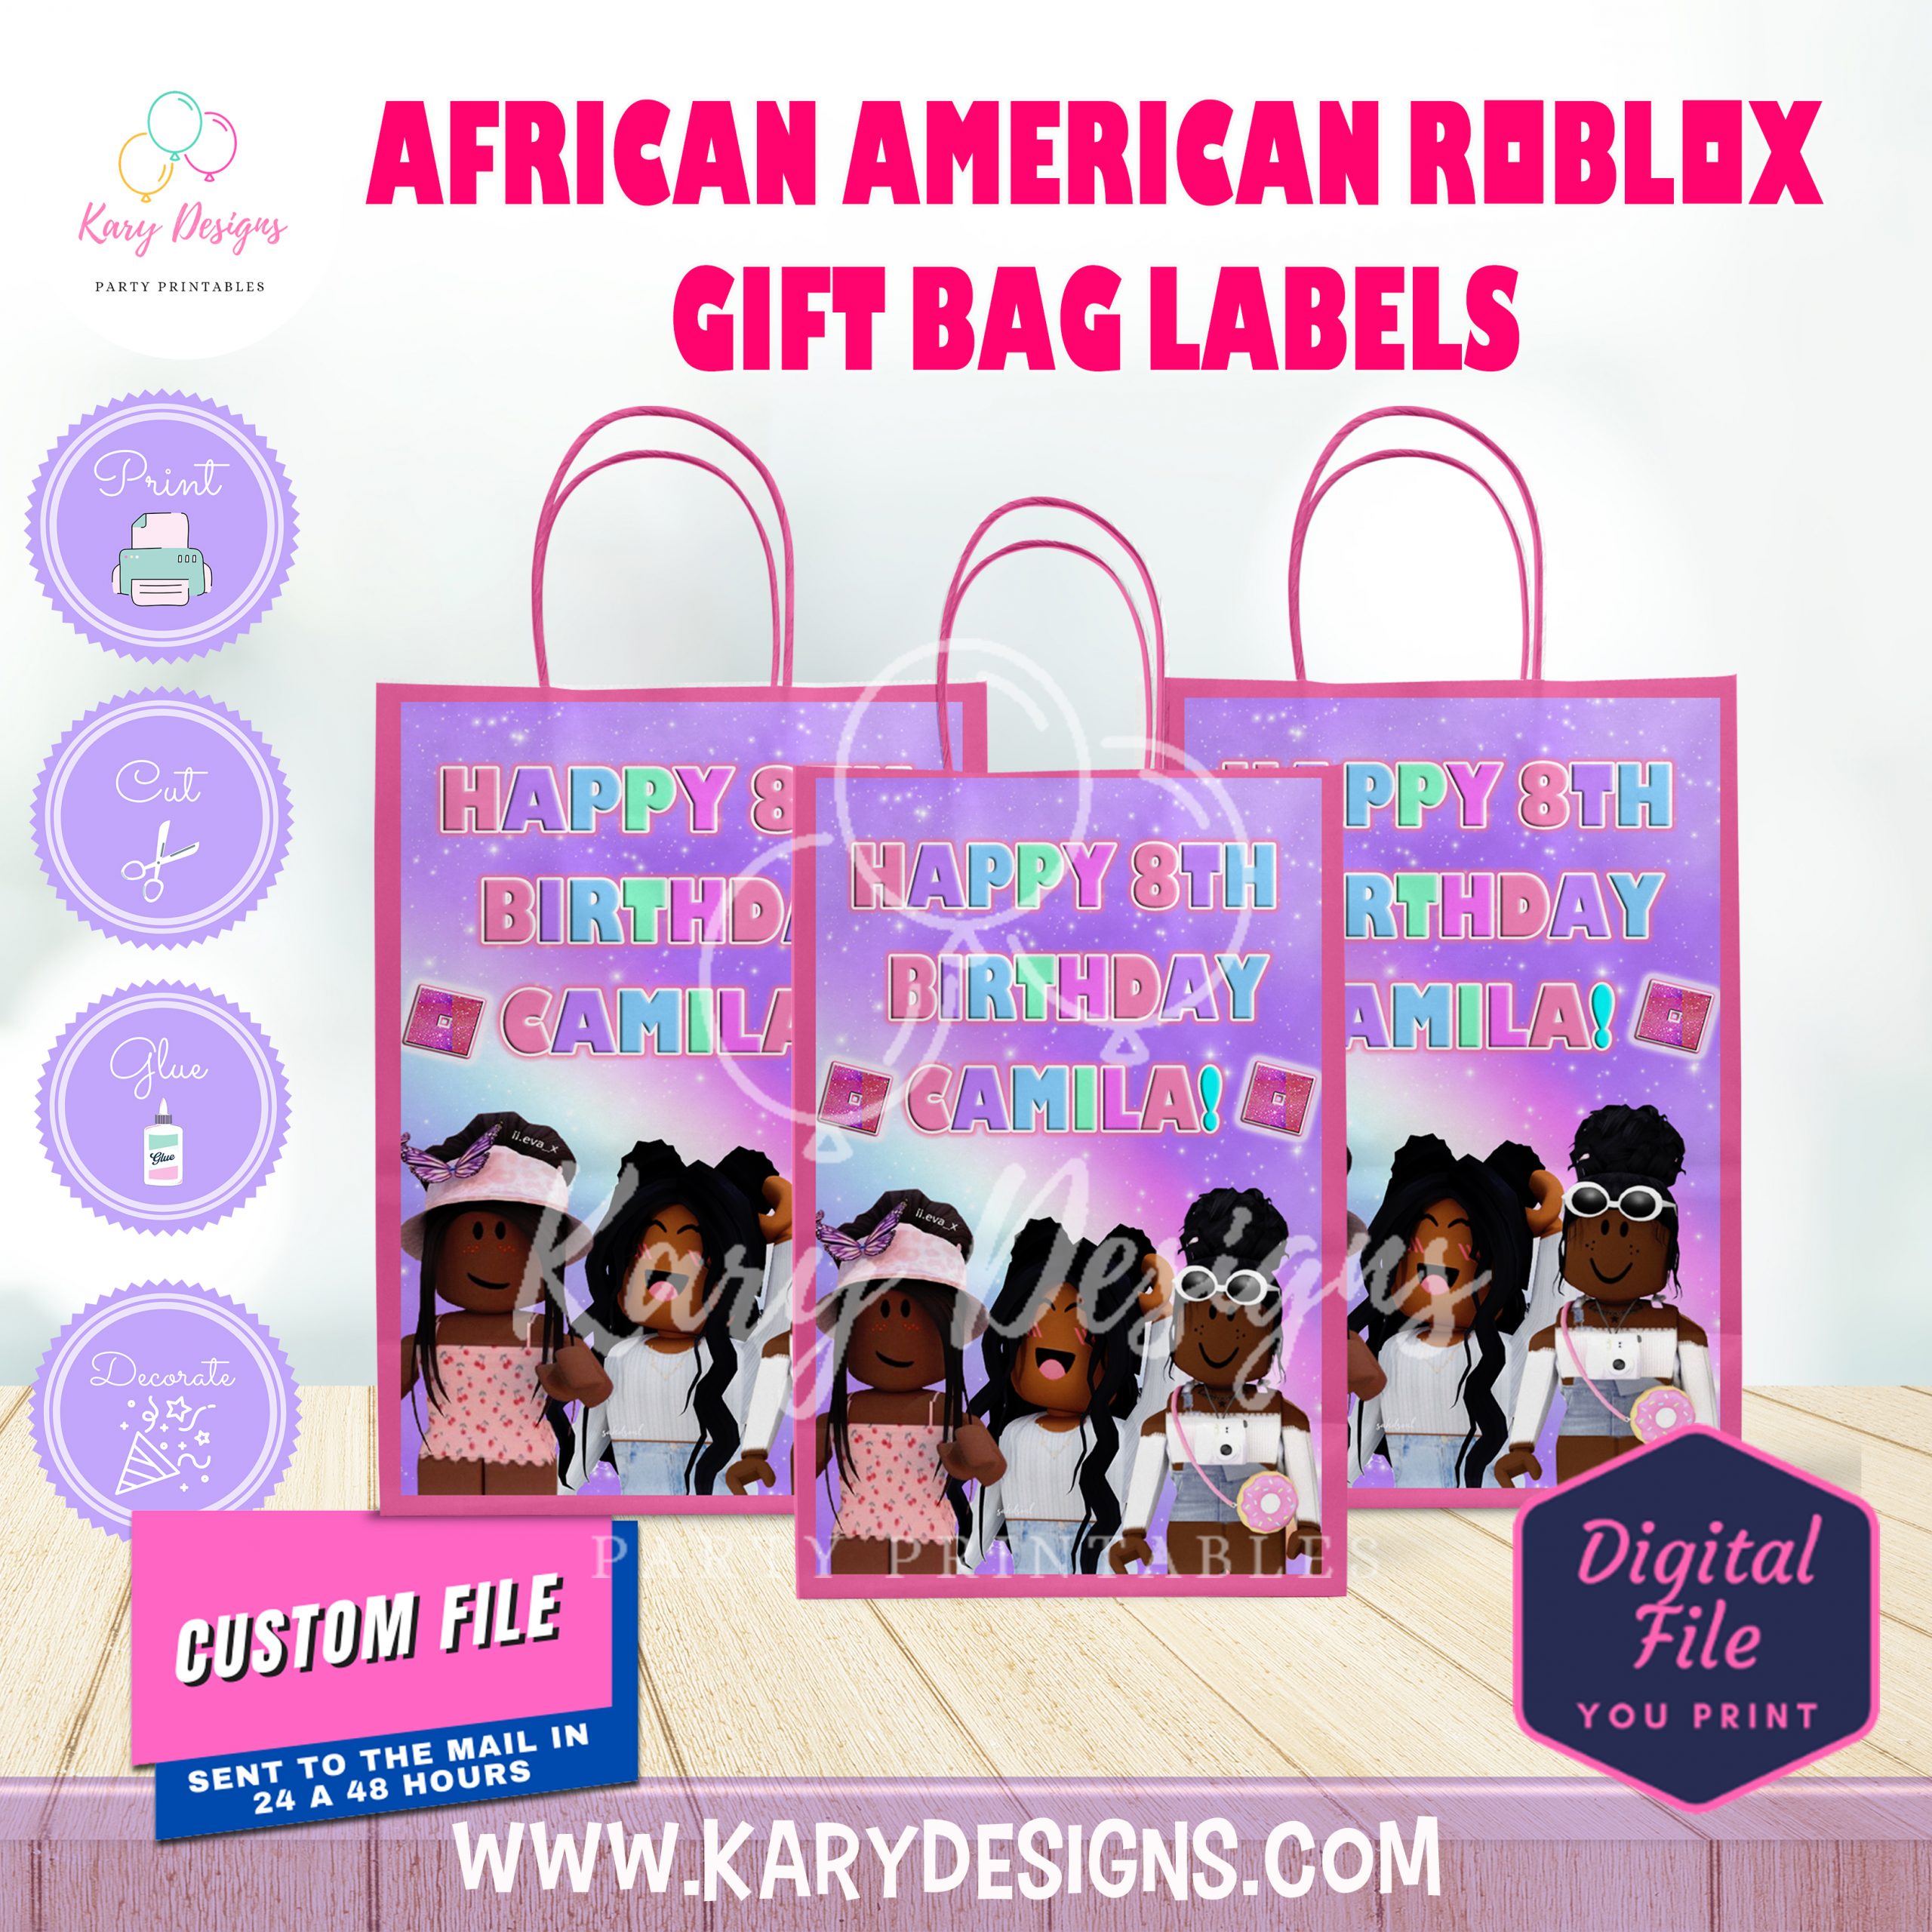 Roblox Girls Party Water Bottle Labels Printable